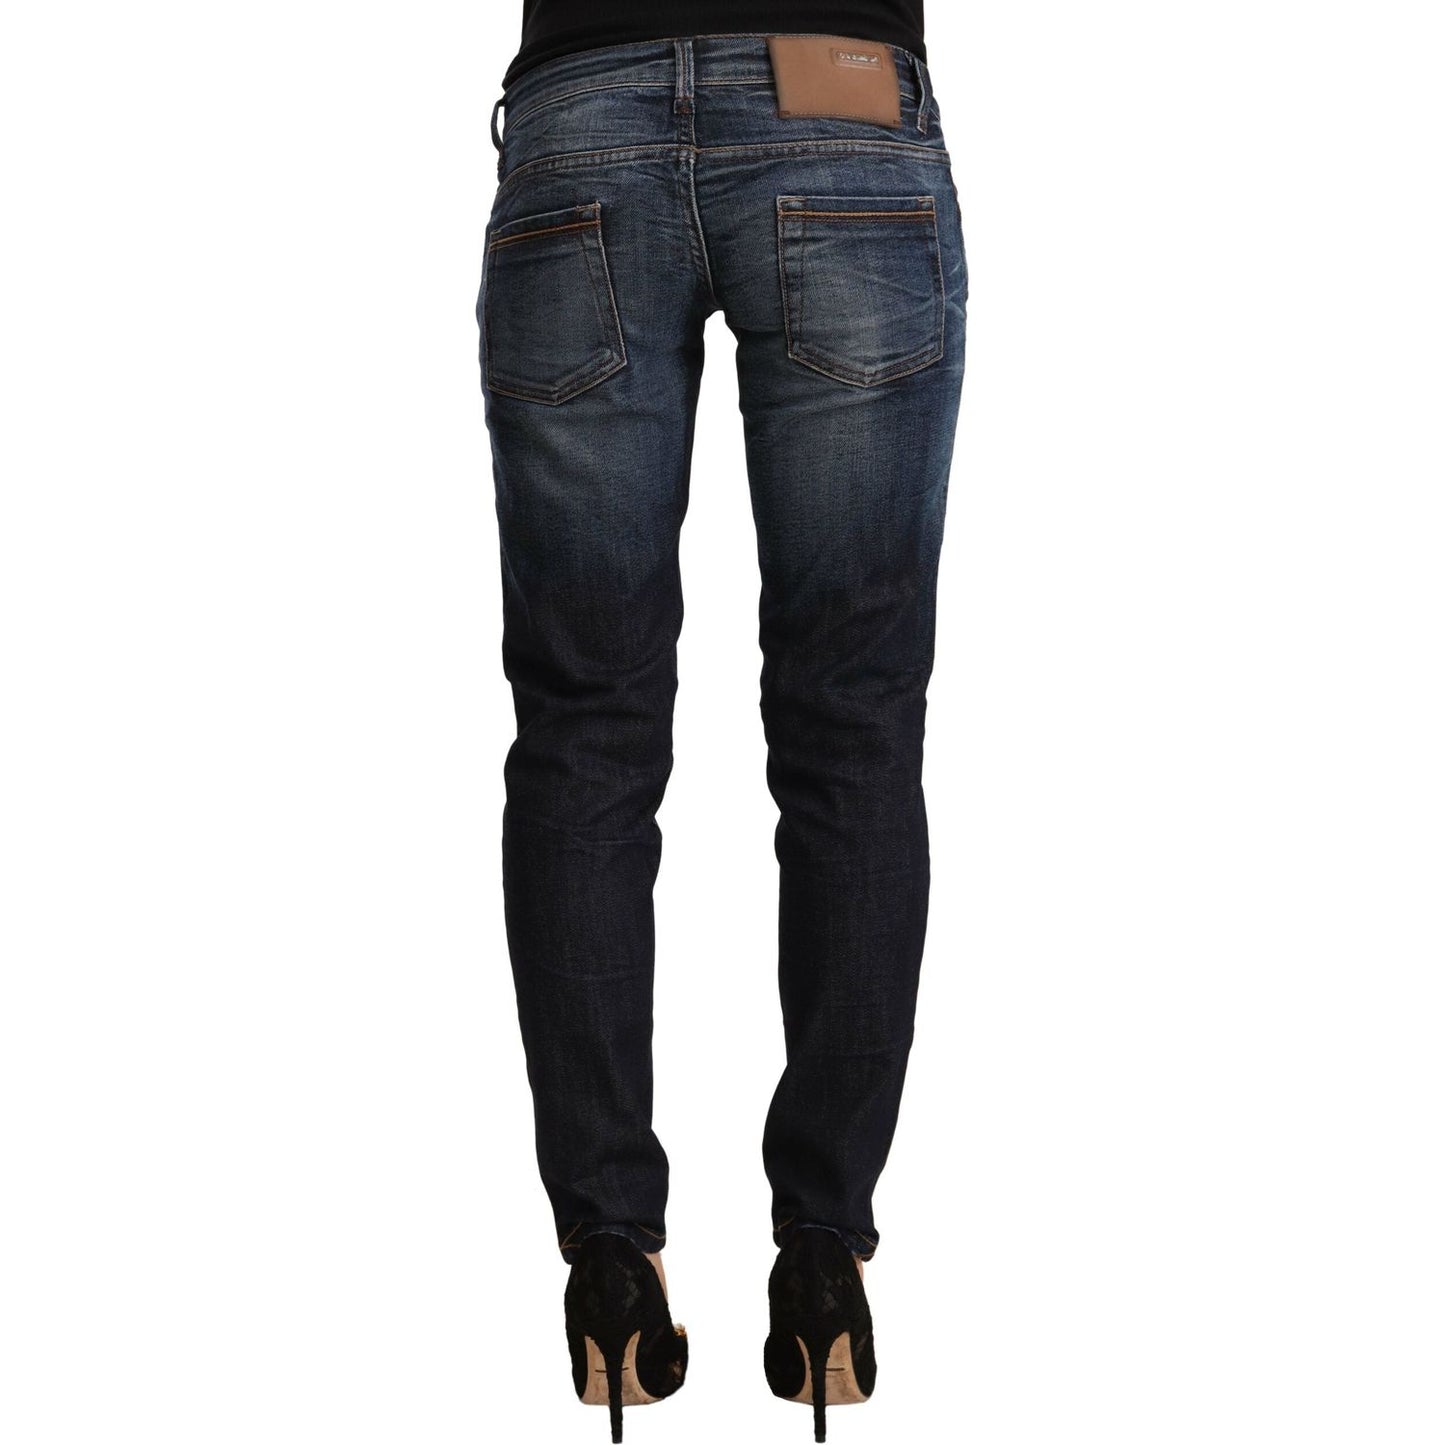 Acht Chic Slim Fit Blue Washed Jeans blue-washed-cotton-low-waist-skinny-denim-jeans-3